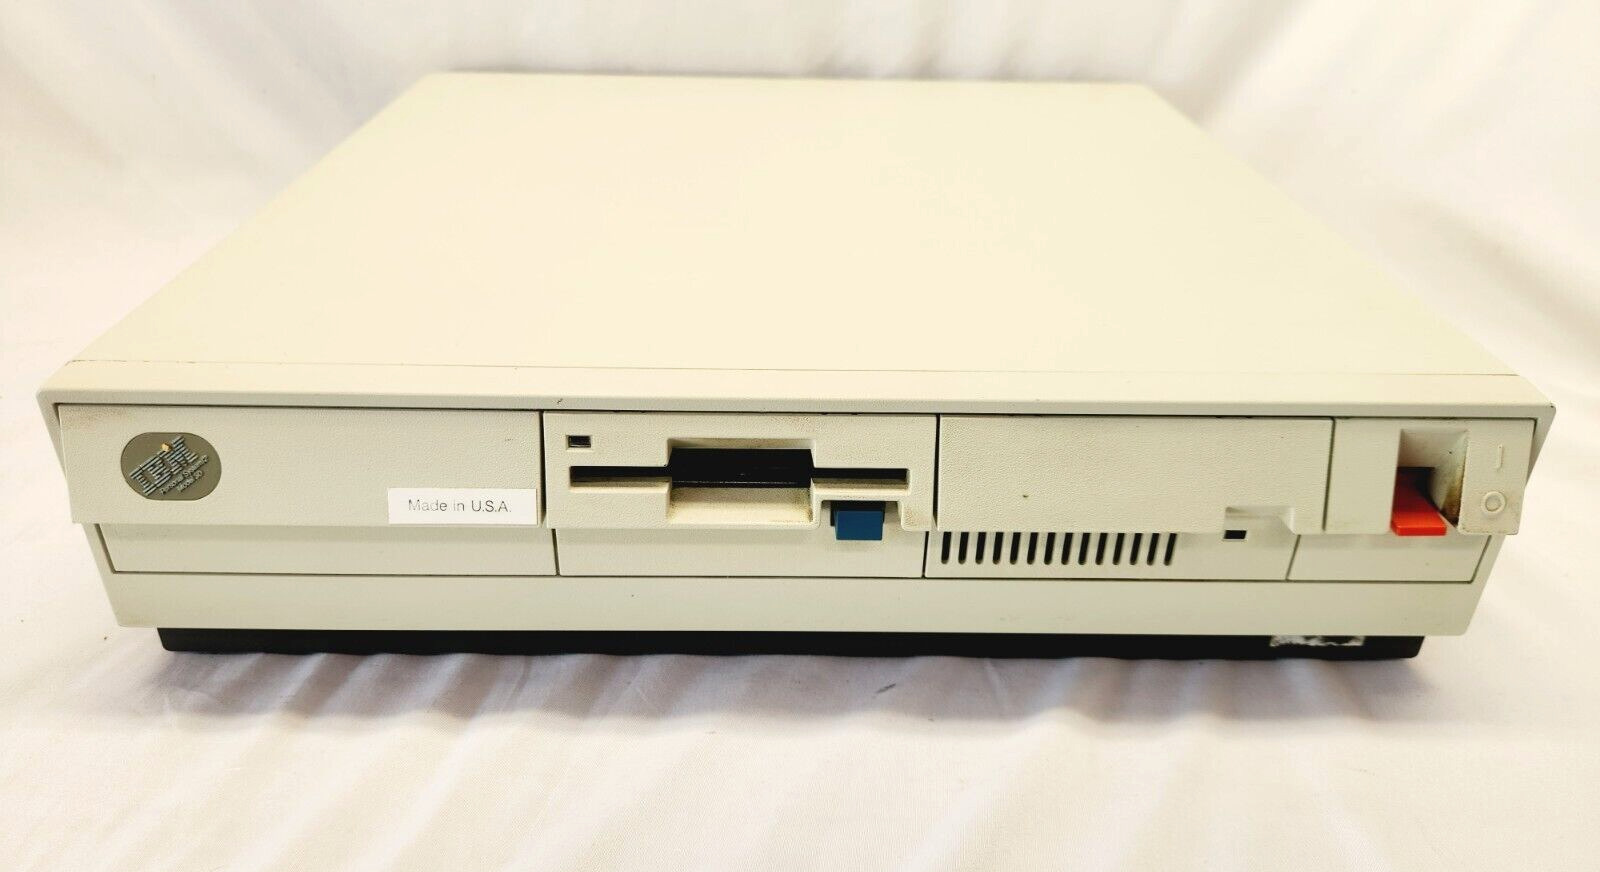 Vintage IBM Personal System/2 PS/2 Model 30 8530 Computer - Powers On